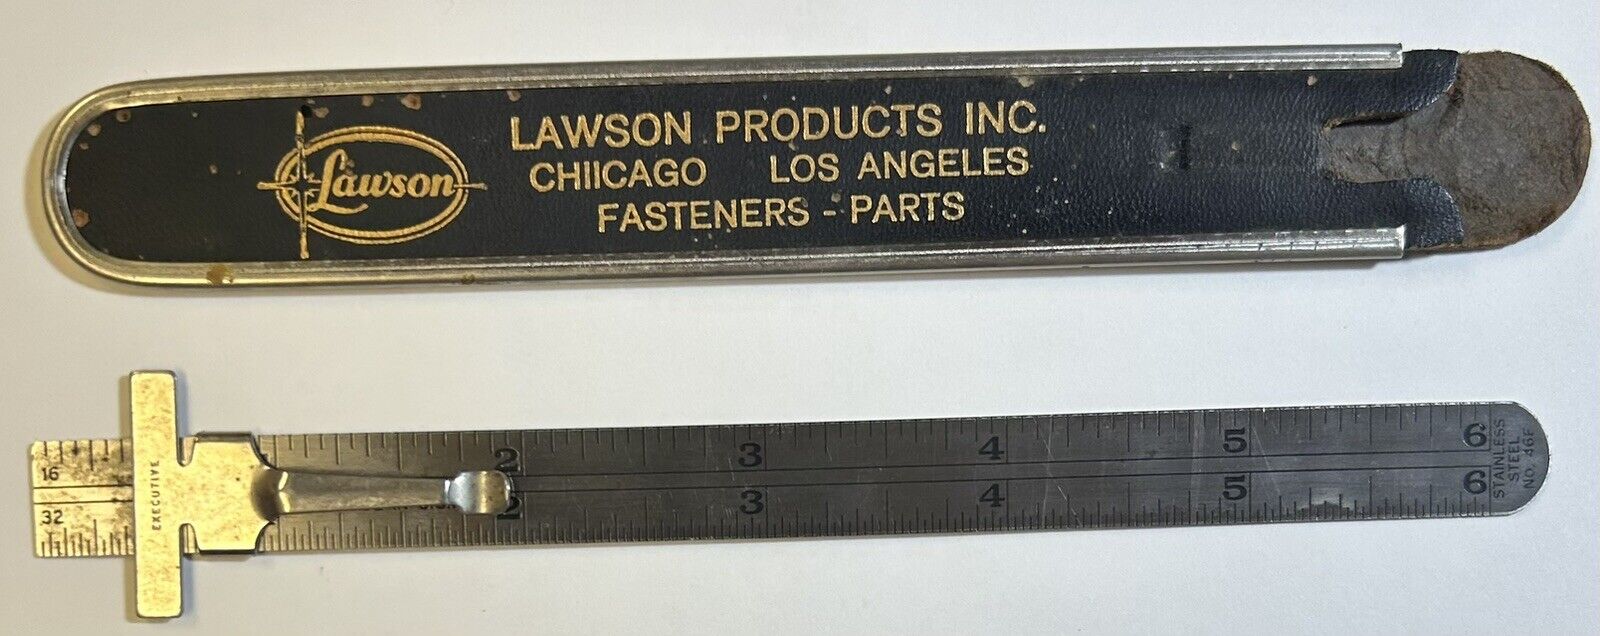 Lawson Products Inc. Stainless Steel Slide Ruler, Vintage